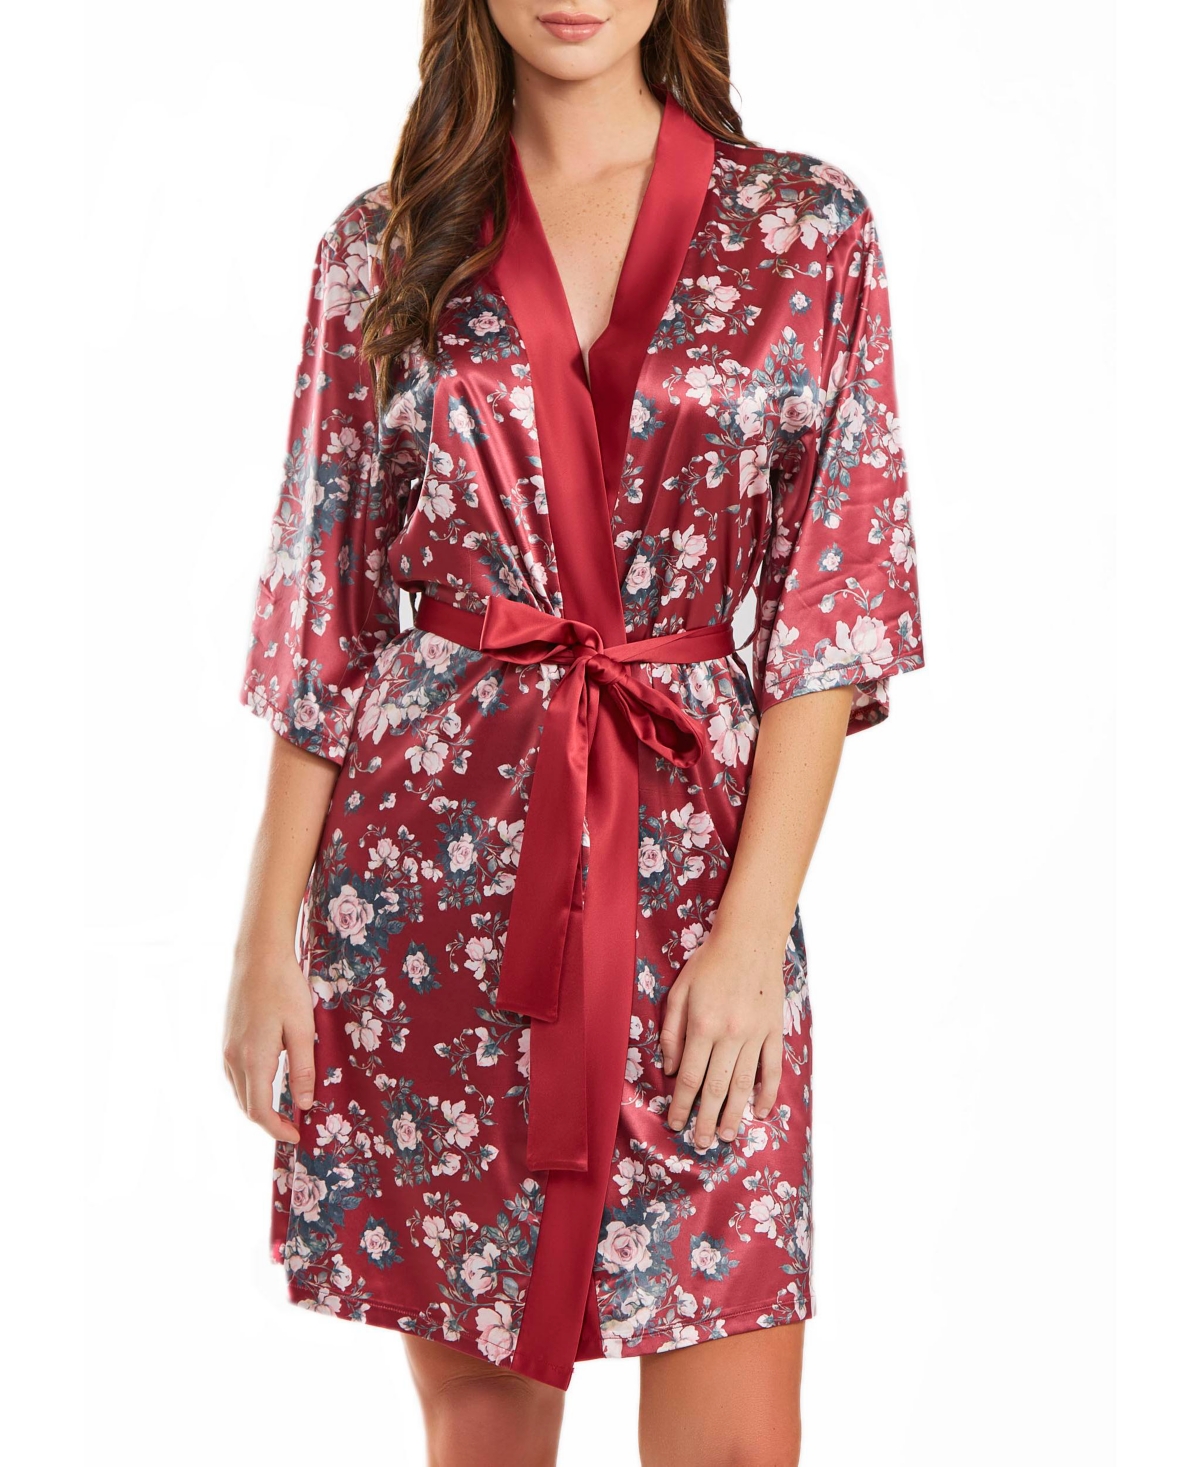 Icollection Jenna Plus Size Contrast Satin Floral Robe With Self Tie Sash, 1 Piece In Burgundy